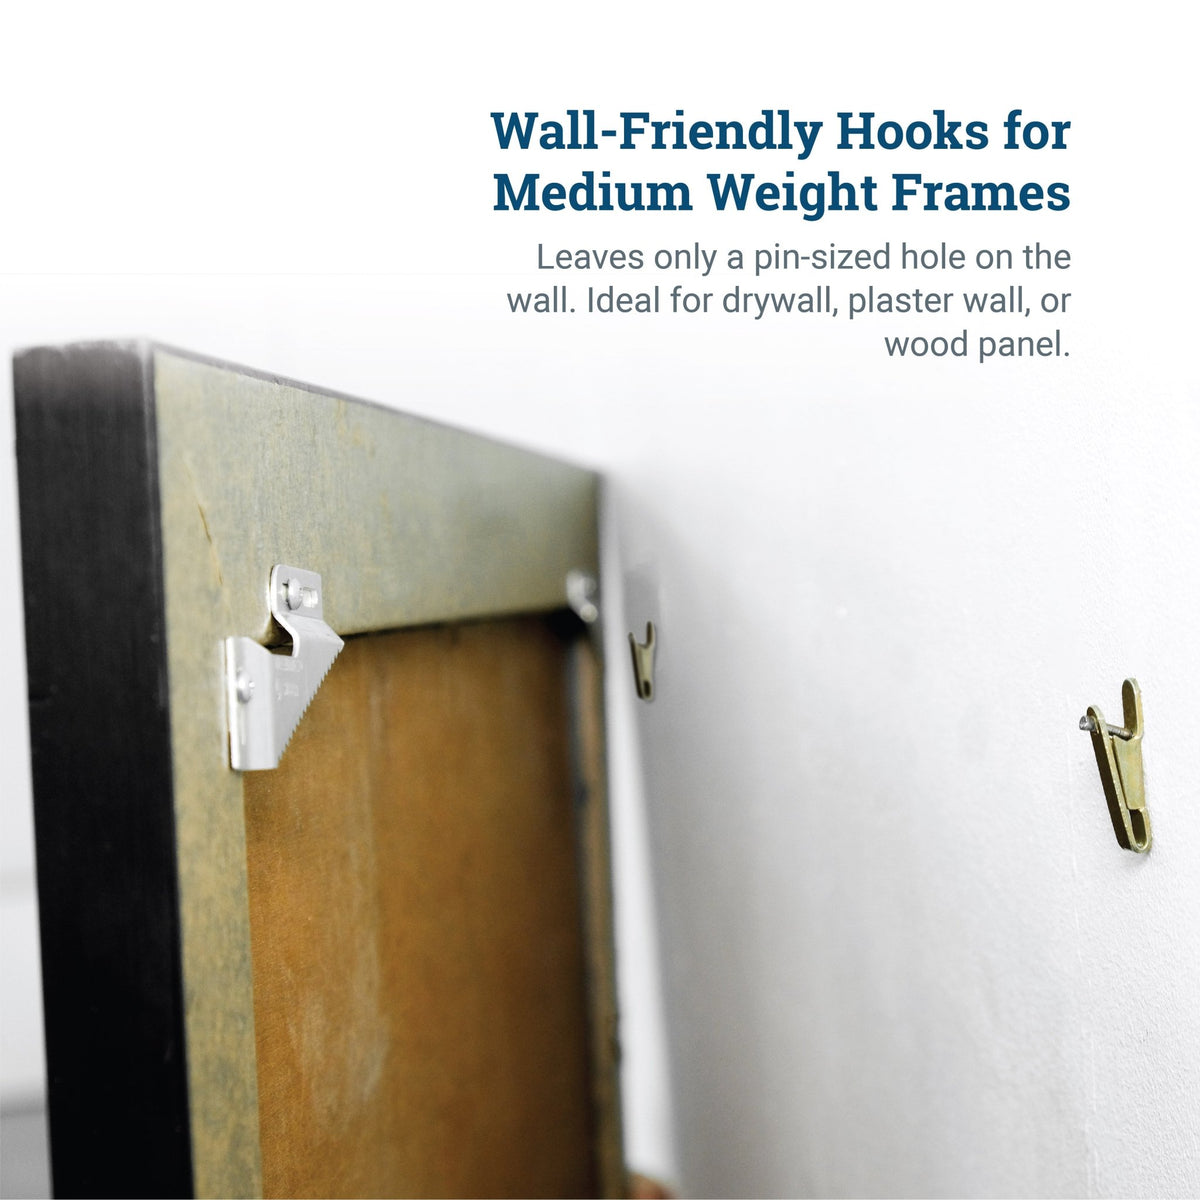 Replacement Hook/Nail Pair for Small or Metal Wall Buddies - HWR-WB-HookSm - Picture Hang Solutions